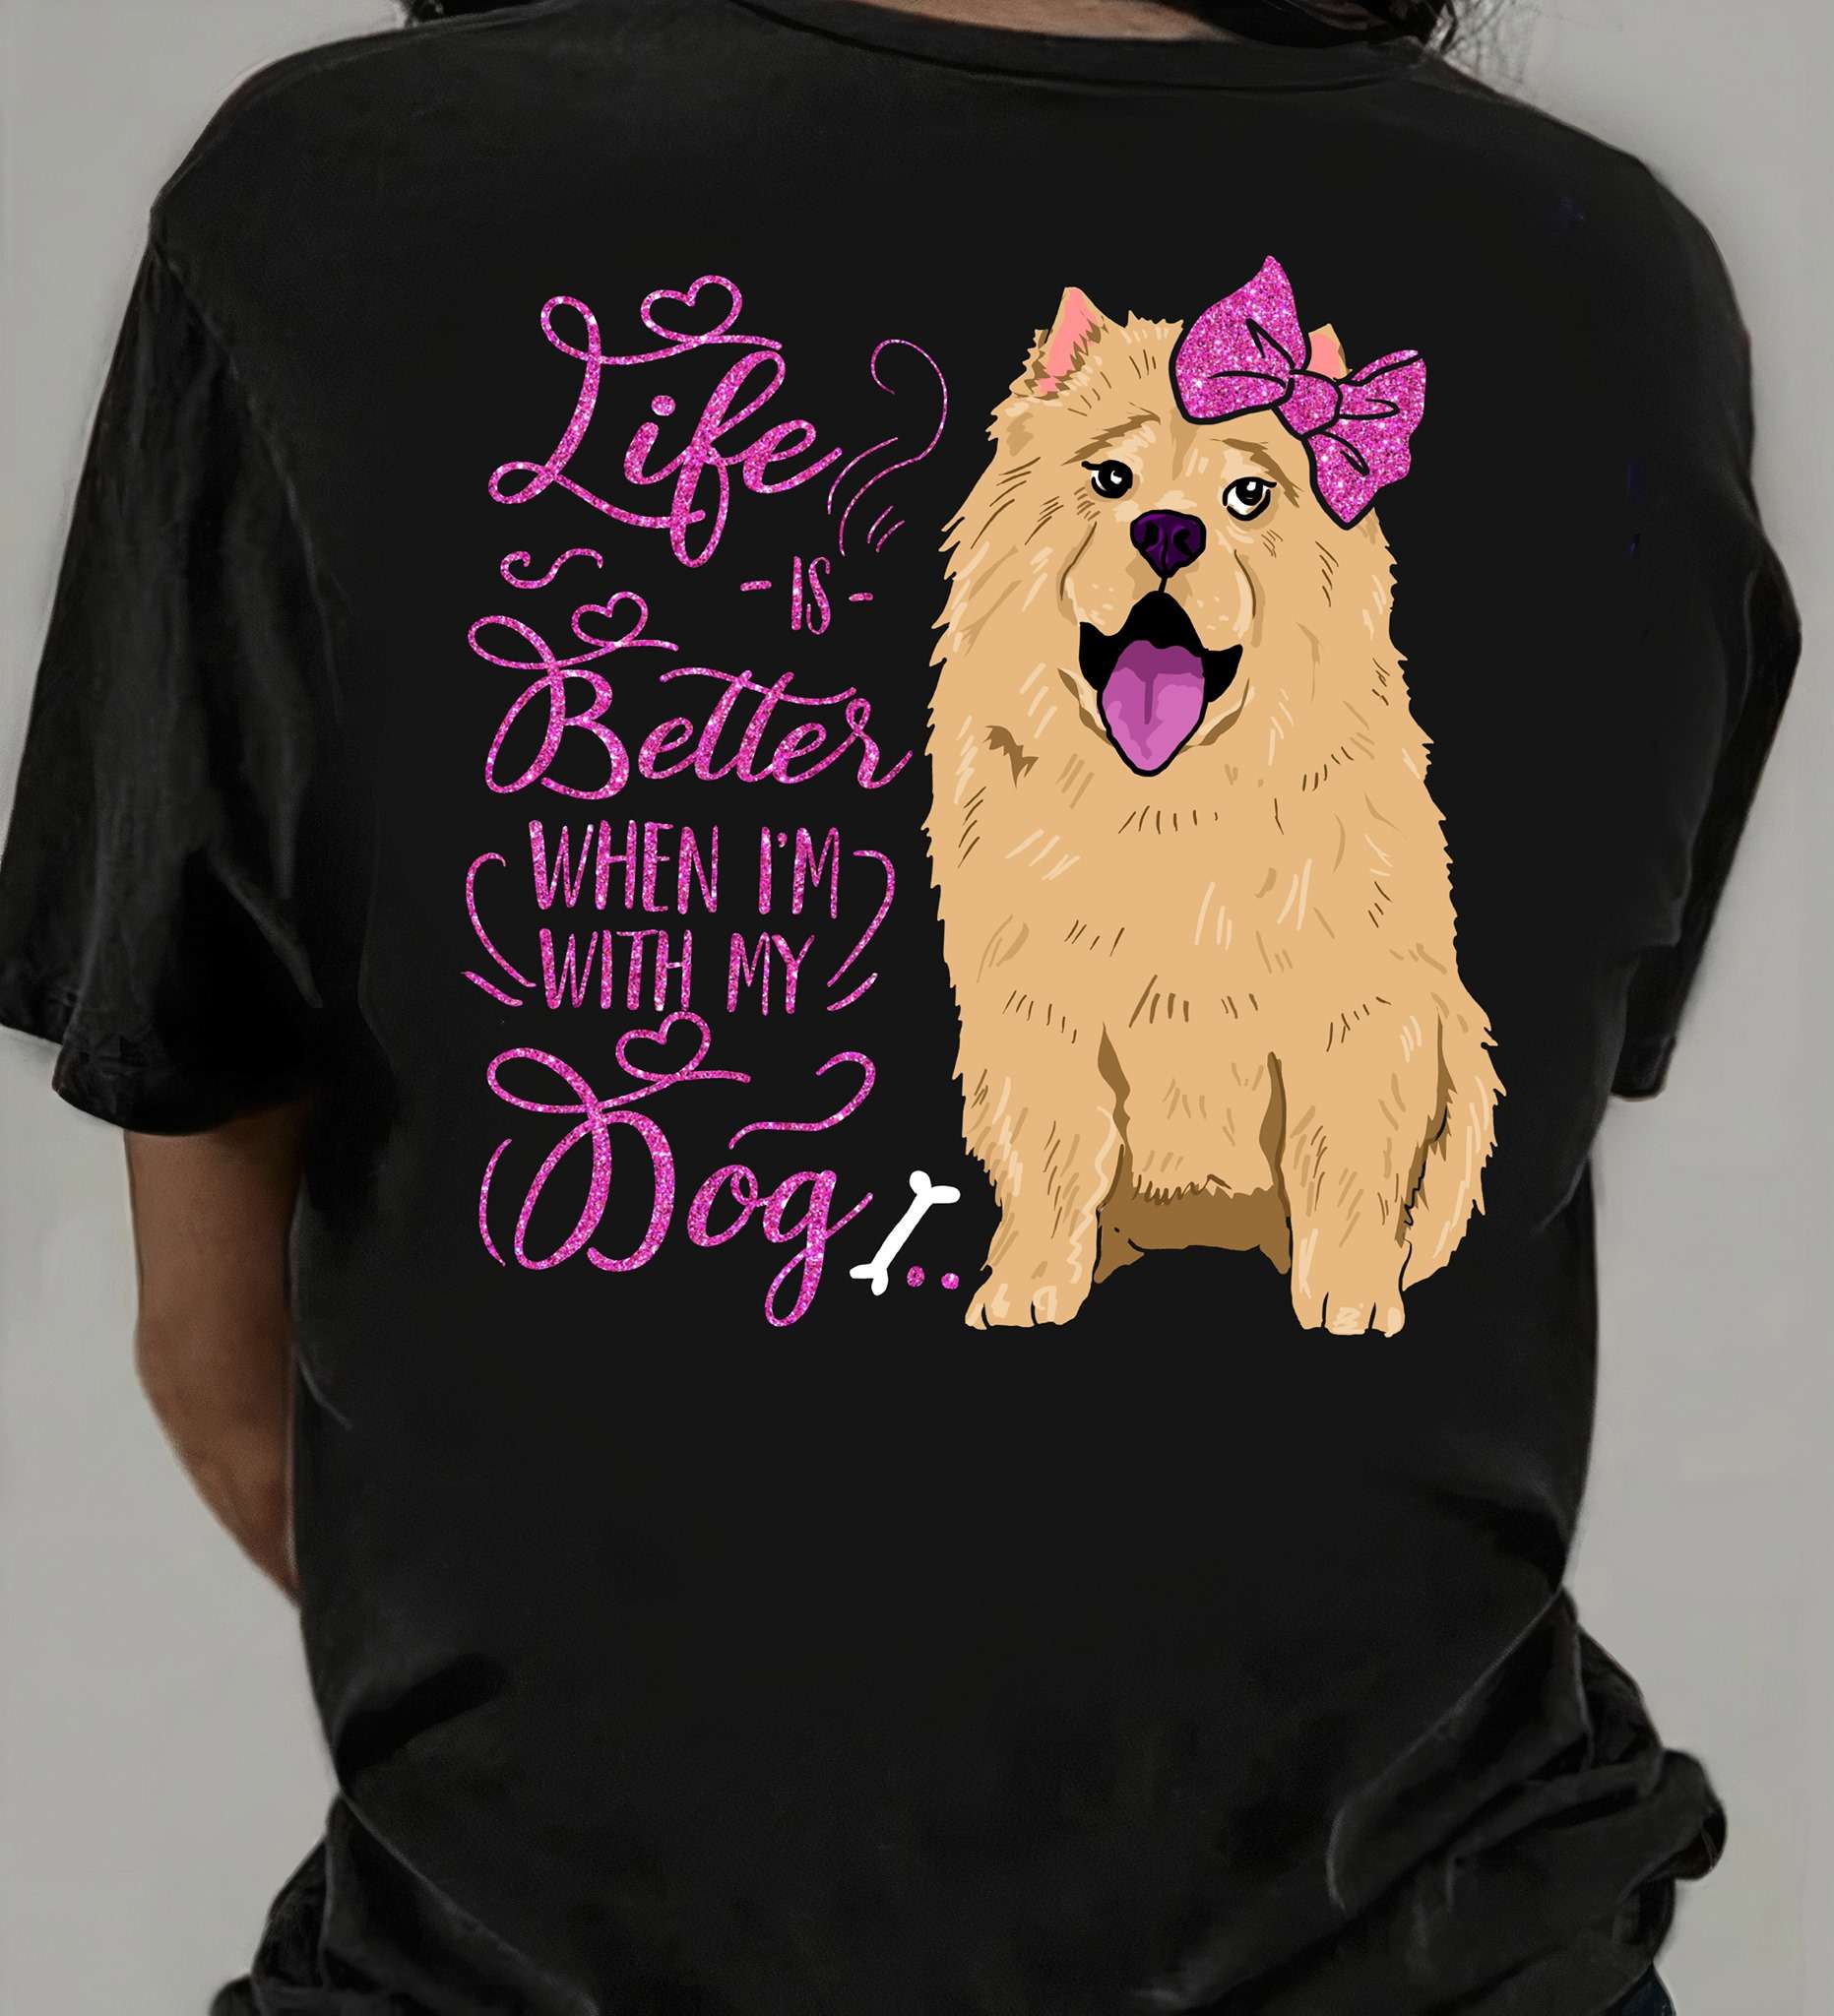 Life is better when i'm with my dog - Chow Chow